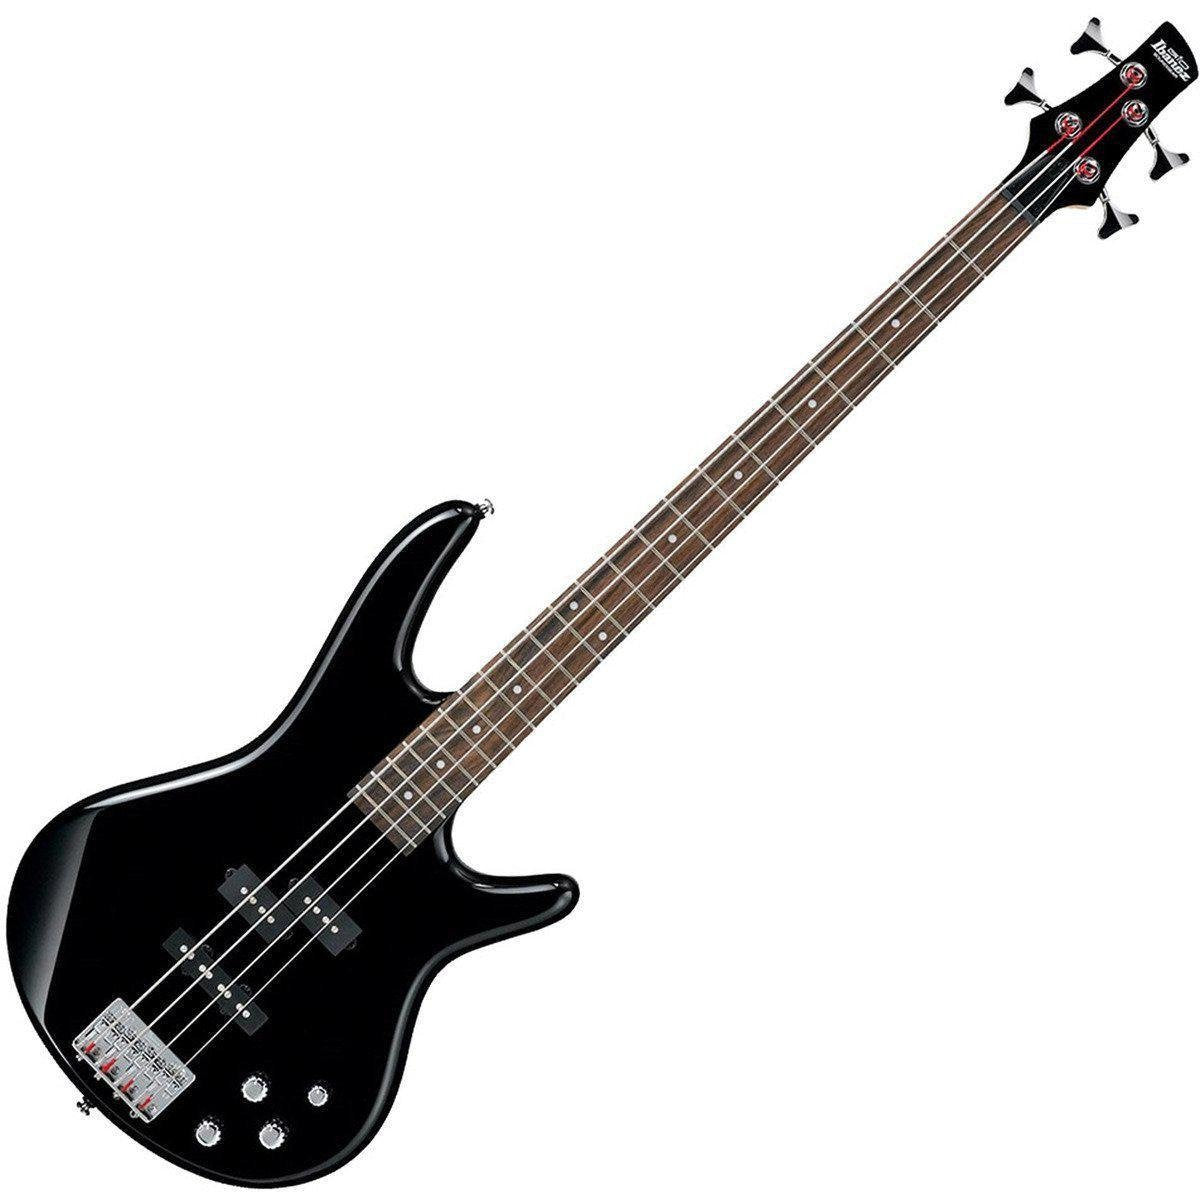 Ibanez GSR200 Electric Bass Guitar-Black-Andy's Music